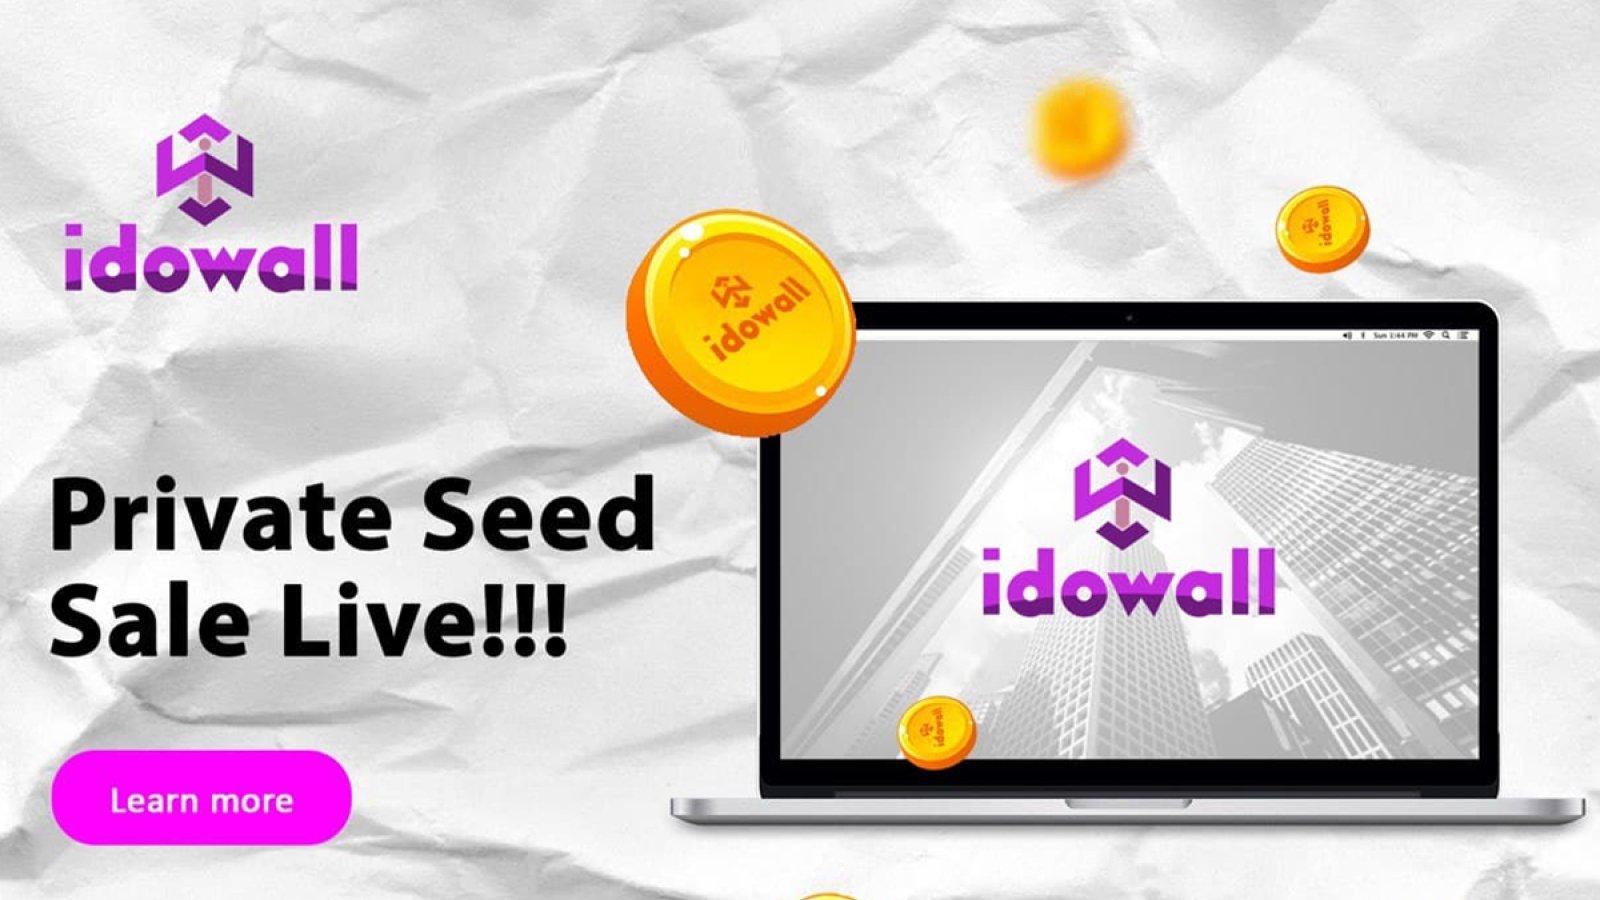 Idowall Starts Off with Seed-Sales, Aims to Maximize the Benefits for Earlier Joiners